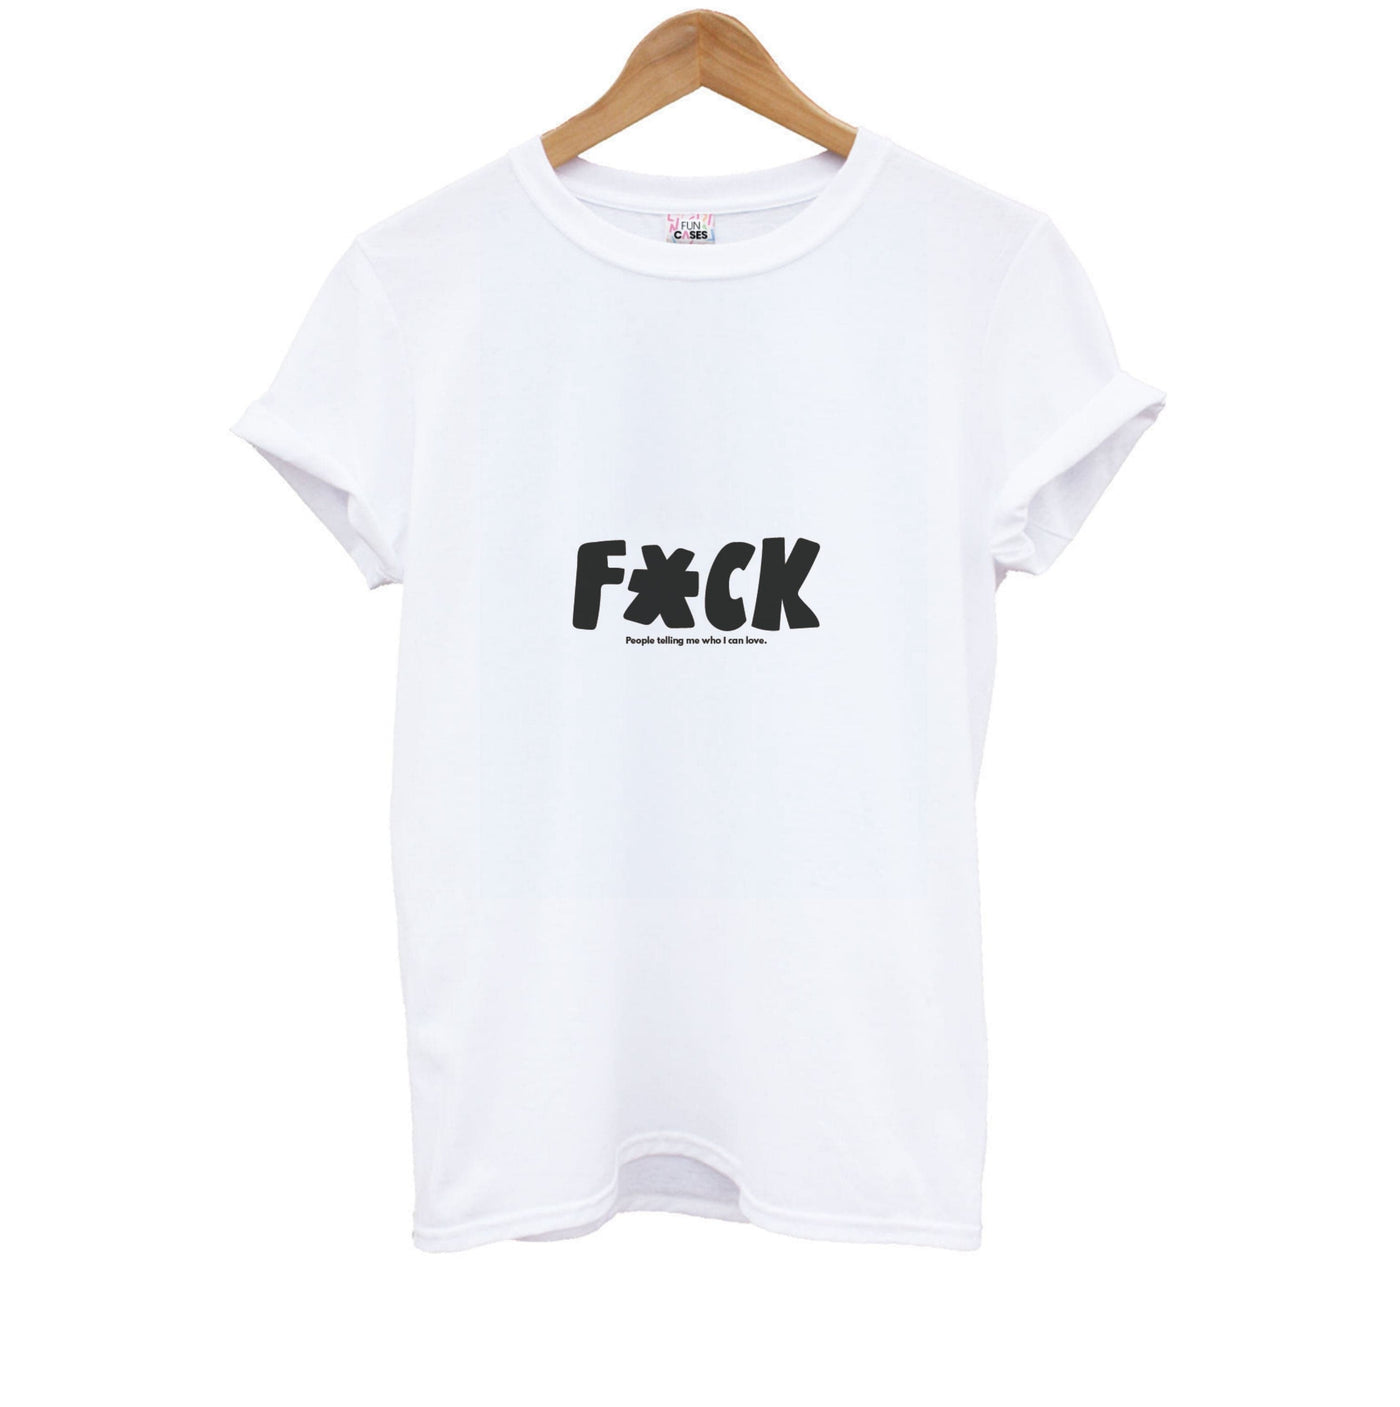 F'ck people telling me who i can love - Pride Kids T-Shirt